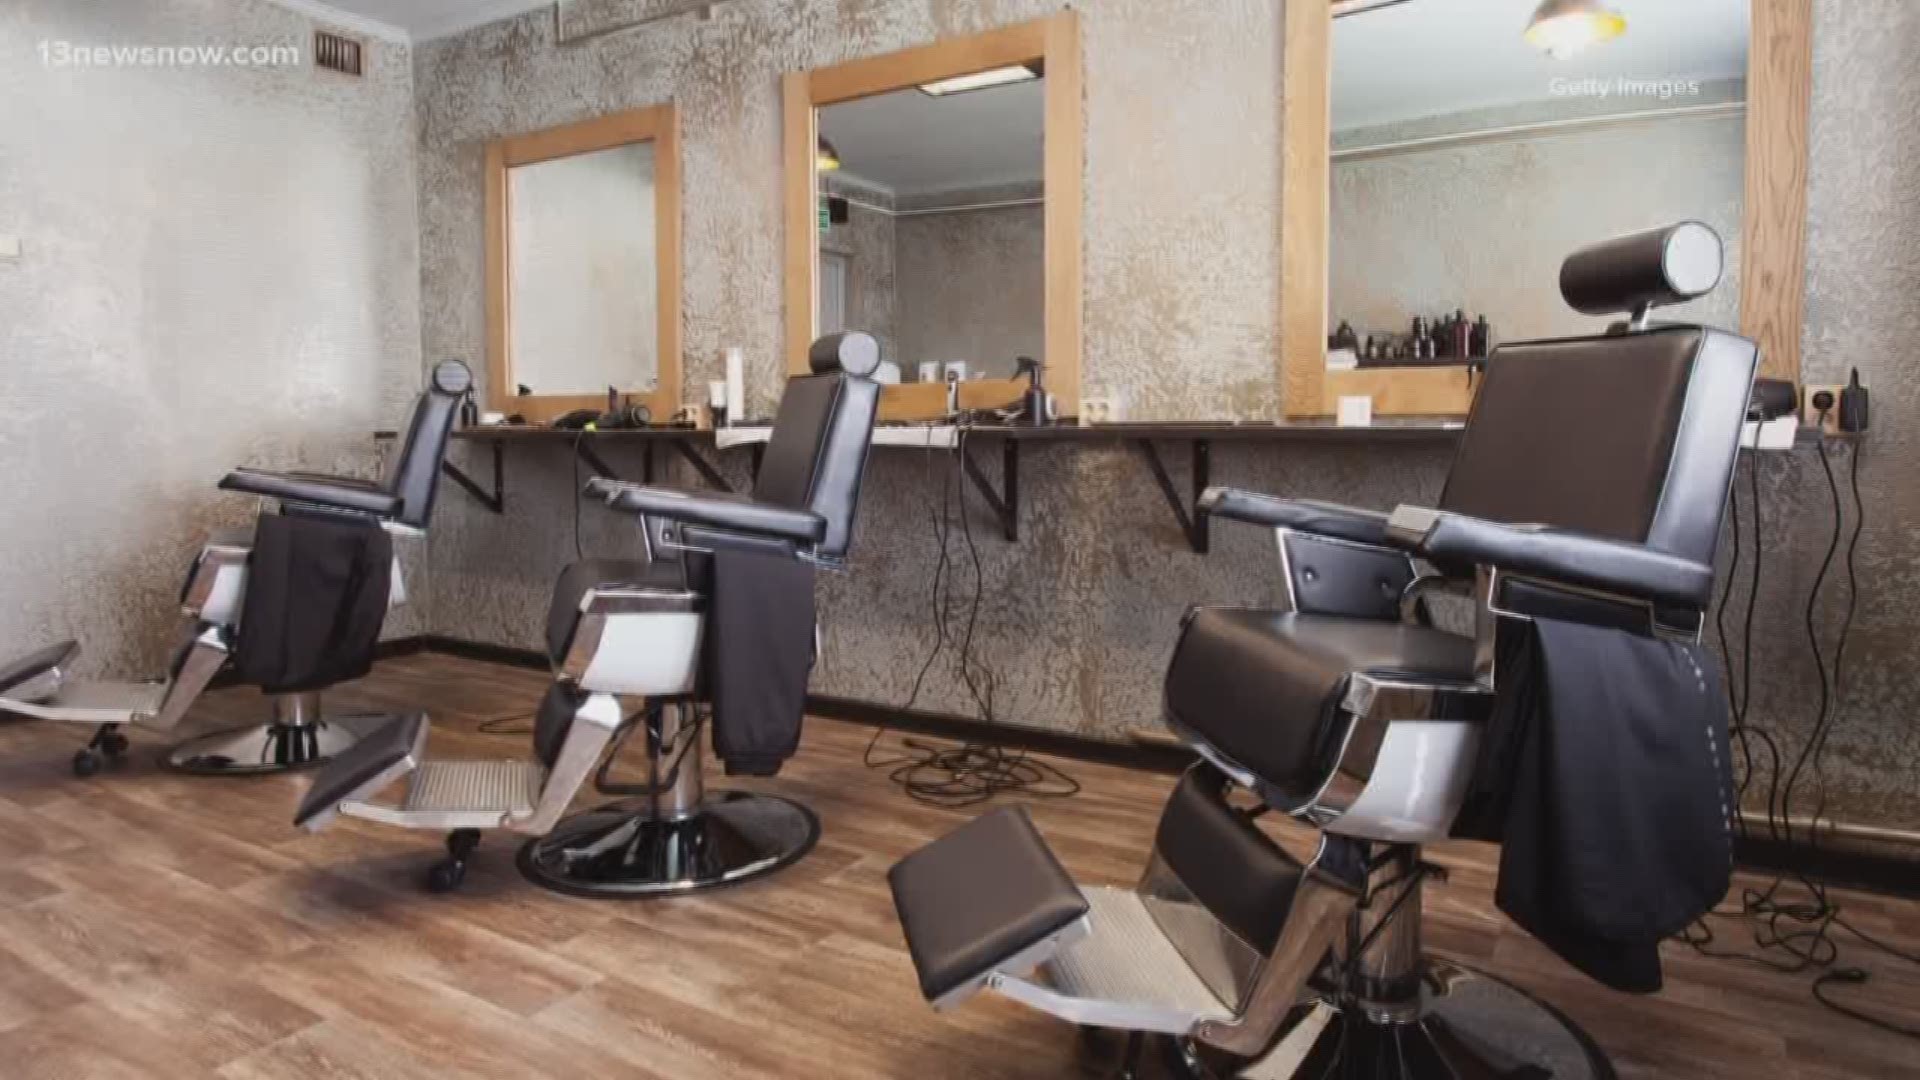 Personal care businesses like barber shops and nail salons closed to protect against the spread of coronavirus. One entrepeneur has tips to get through the closure.